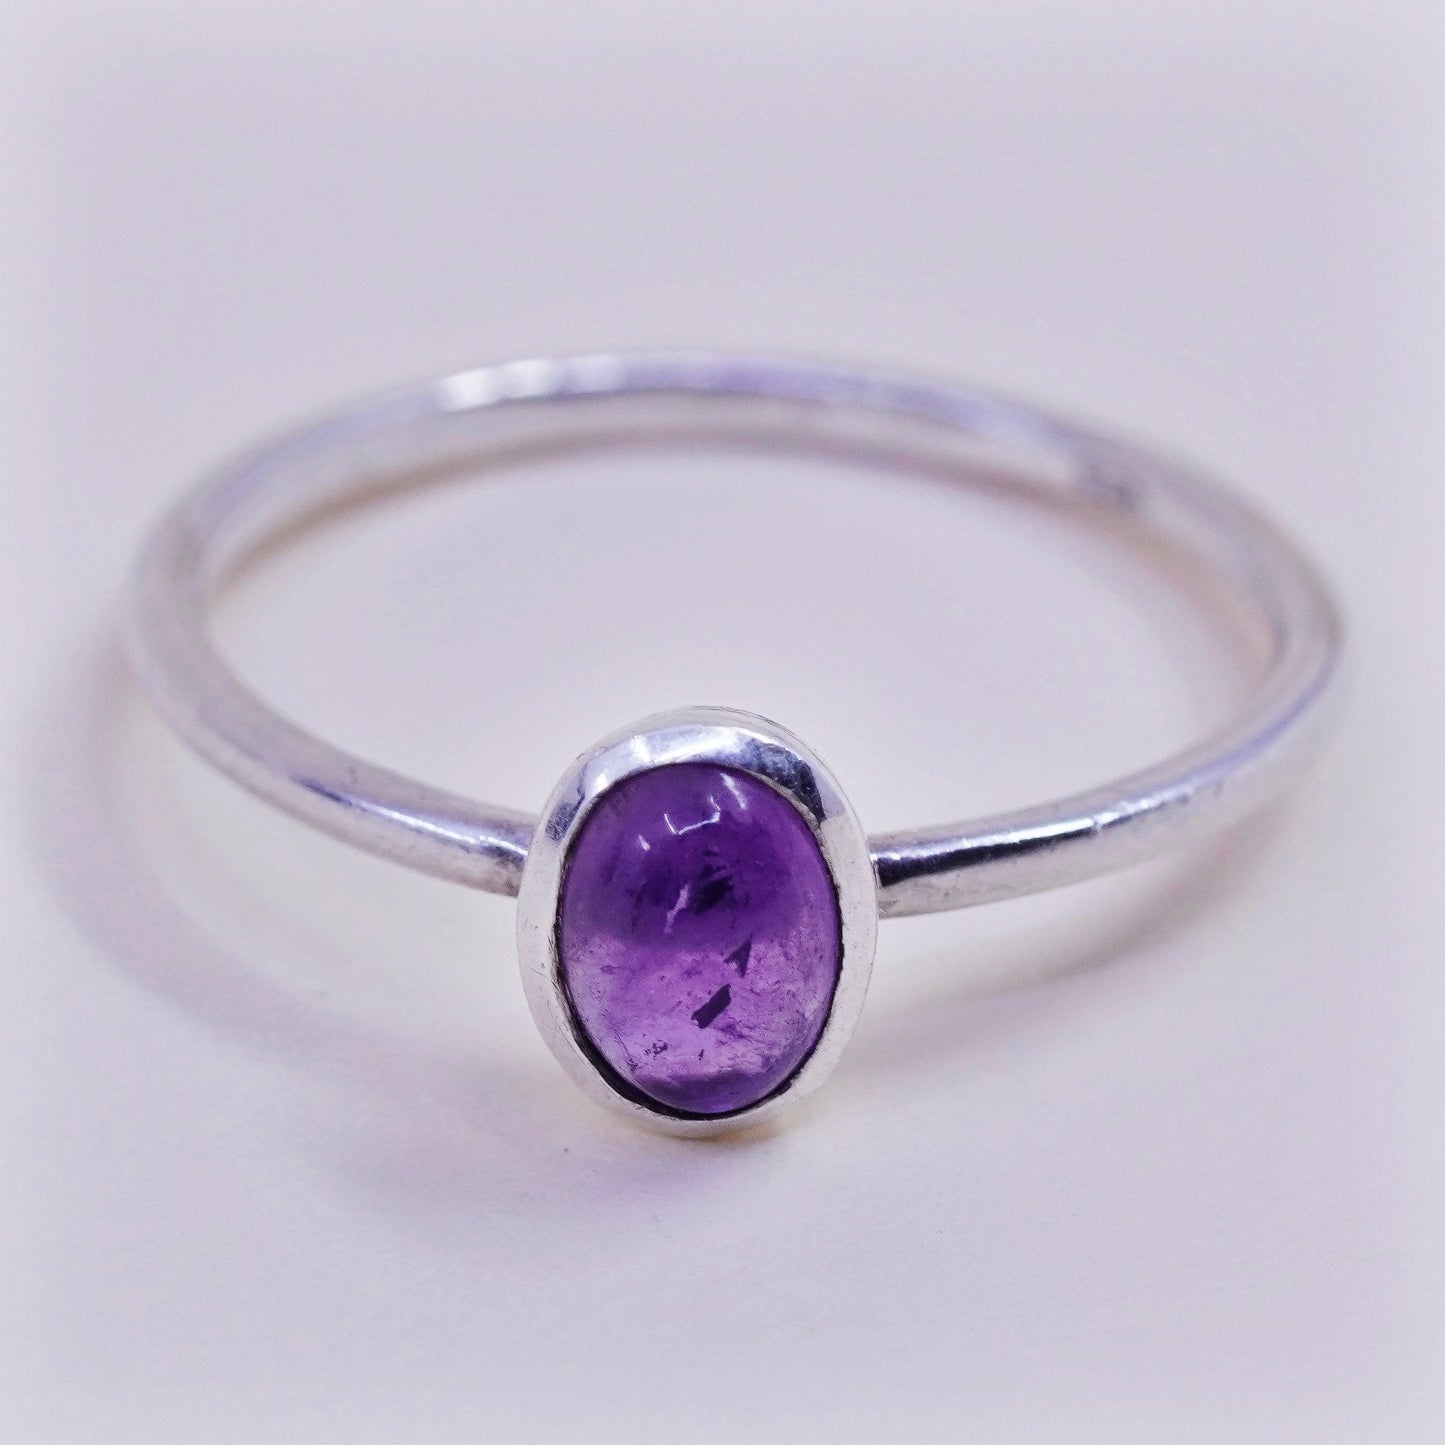 Size 9.25, vintage Sterling 925 silver handmade stackable ring with amethyst